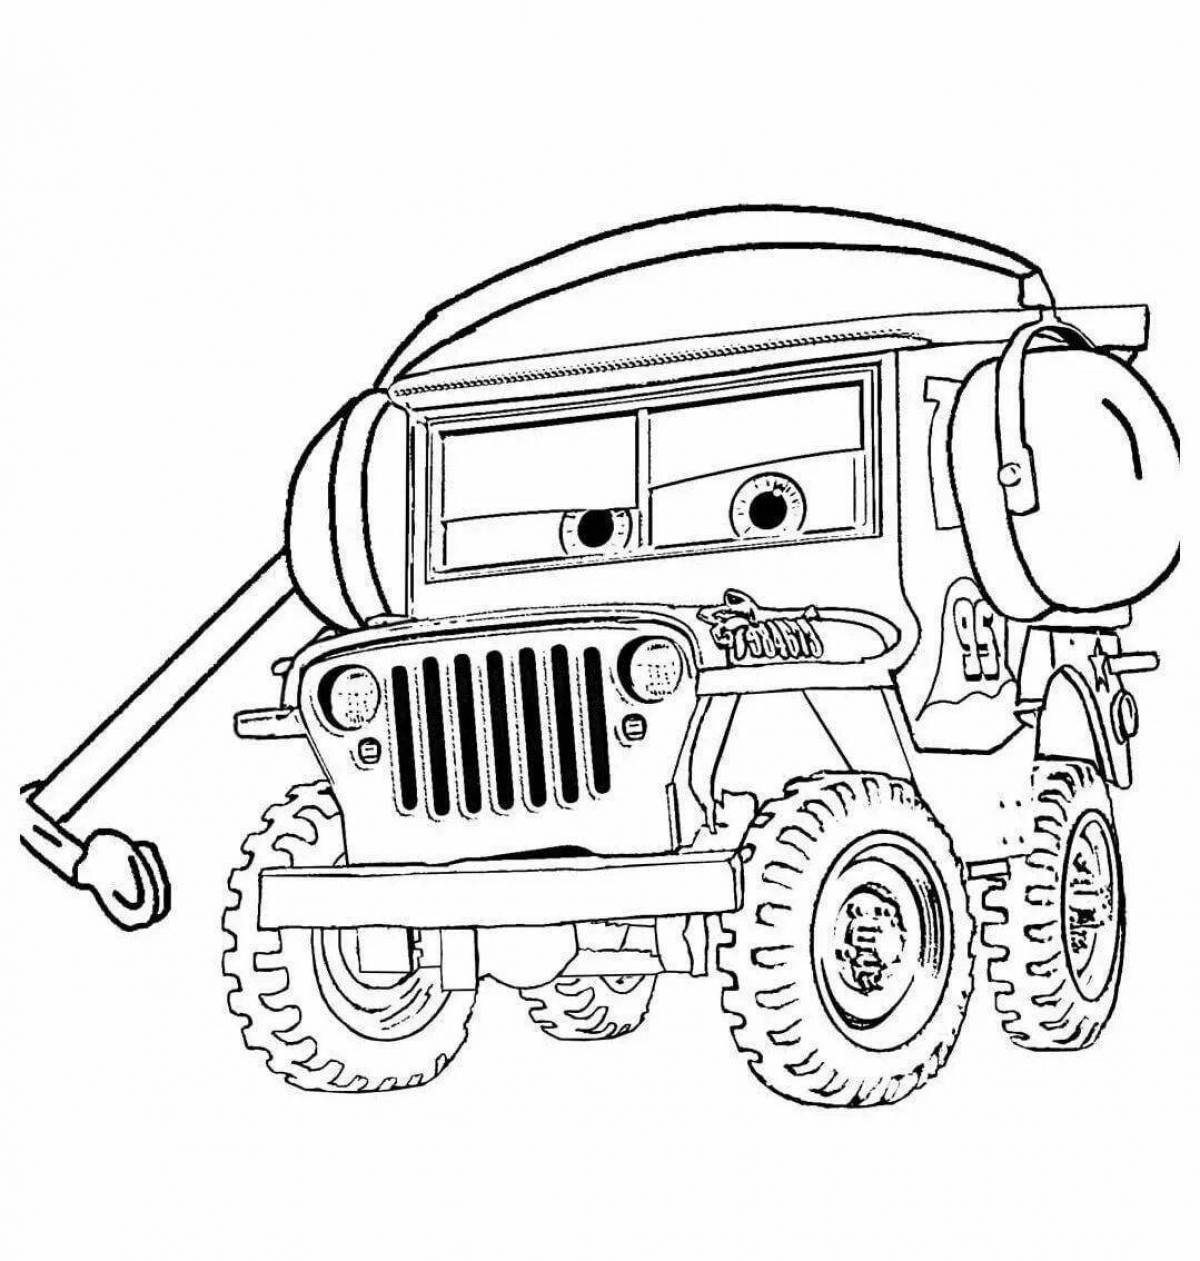 Coloring pages adorable cars for boys